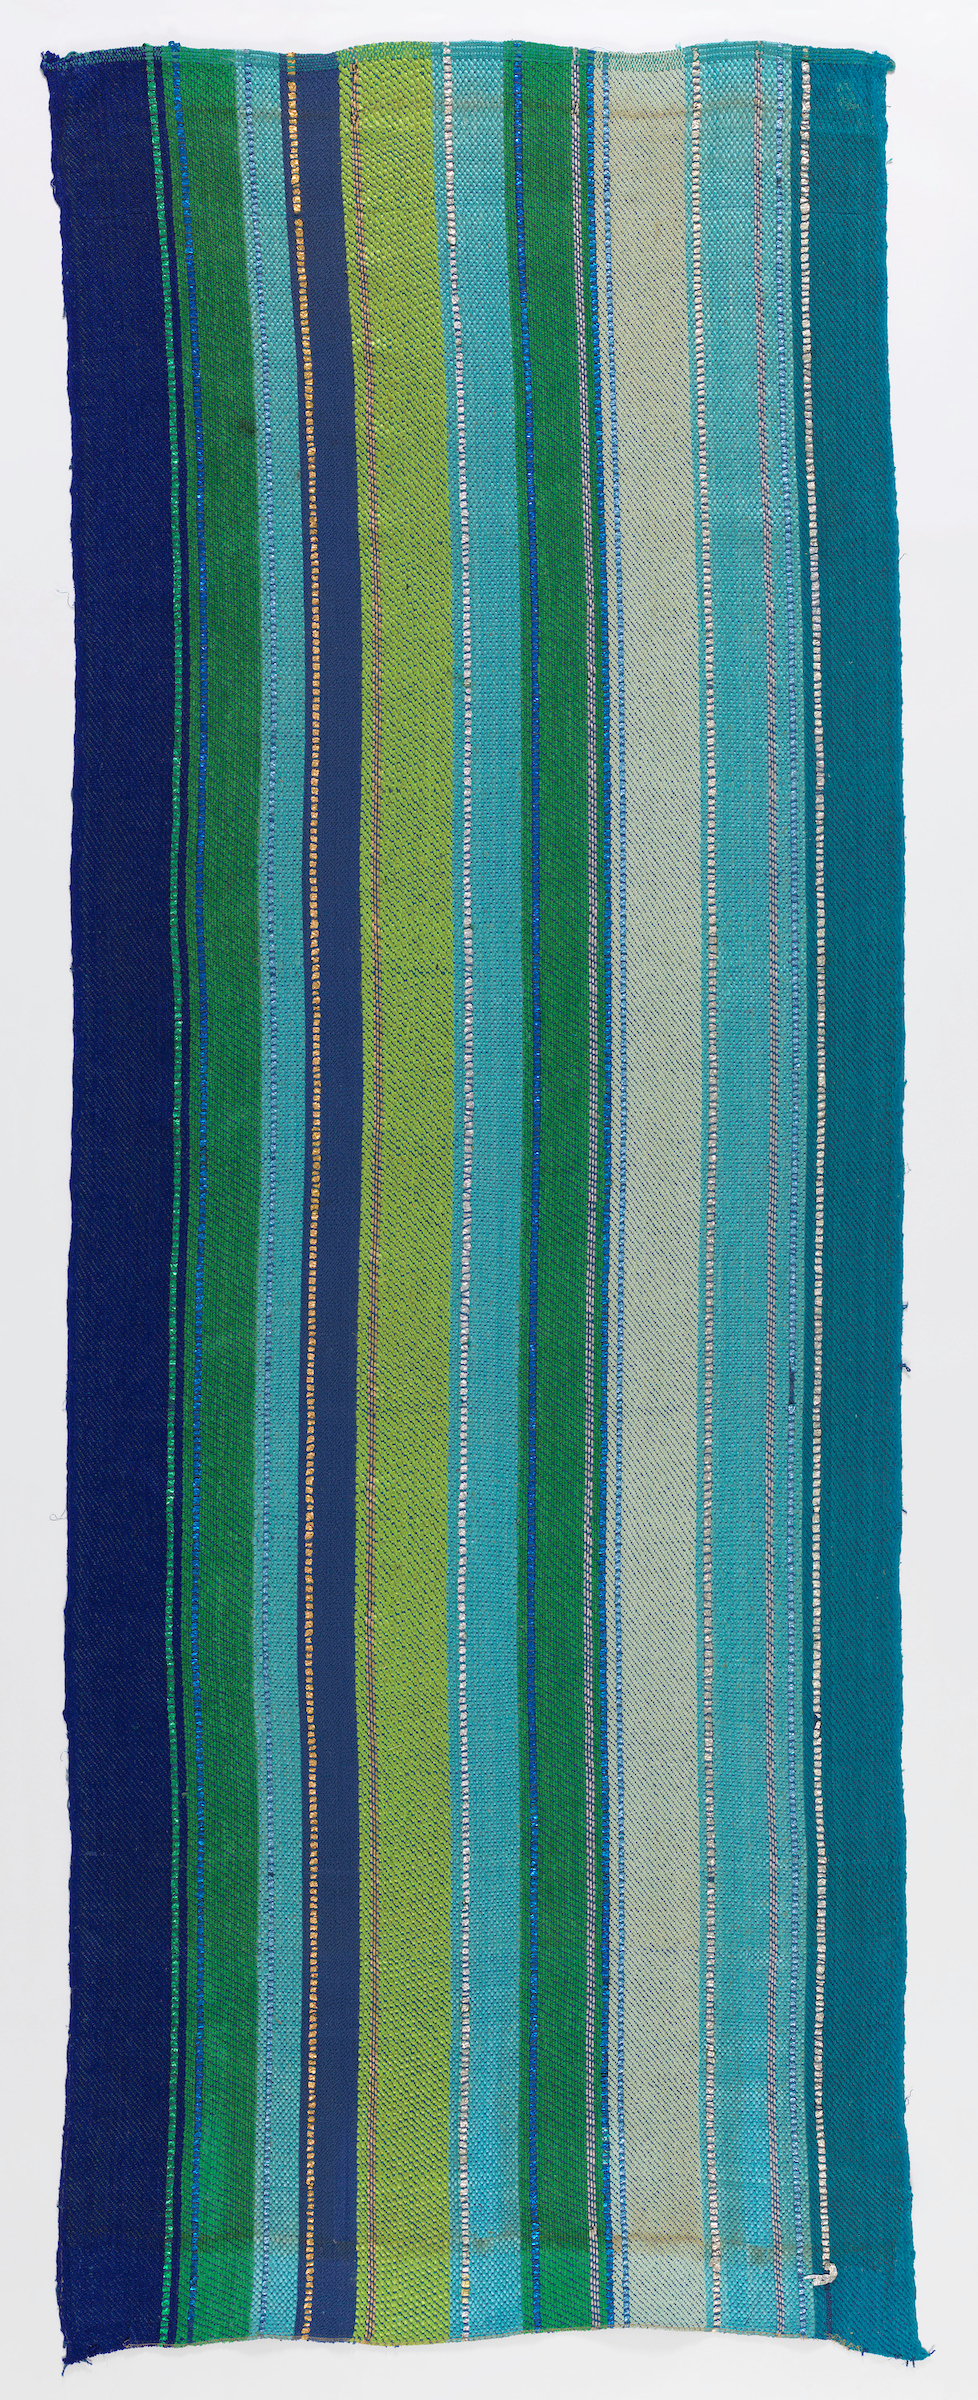 Dorothy Liebes, Handwoven panel for the Observation Lounge of the <em>SS United States</em> (1952). Collection of the Cooper Hewitt, Smithsonian Design Museum, New York, gift of the estate of Dorothy Liebes Morin. Photo by Matt Flynn ©Smithsonian Institution.” width=”978″ height=”2400″ srcset=”https://news.artnet.com/app/news-upload/2023/07/1972-75-5-Matt-Flynn.jpg 978w, https://news.artnet.com/app/news-upload/2023/07/1972-75-5-Matt-Flynn-122×300.jpg 122w, https://news.artnet.com/app/news-upload/2023/07/1972-75-5-Matt-Flynn-417×1024.jpg 417w, https://news.artnet.com/app/news-upload/2023/07/1972-75-5-Matt-Flynn-626×1536.jpg 626w, https://news.artnet.com/app/news-upload/2023/07/1972-75-5-Matt-Flynn-835×2048.jpg 835w, https://news.artnet.com/app/news-upload/2023/07/1972-75-5-Matt-Flynn-20×50.jpg 20w, https://news.artnet.com/app/news-upload/2023/07/1972-75-5-Matt-Flynn-782×1920.jpg 782w” sizes=”(max-width: 978px) 100vw, 978px”/></p>
<p id=